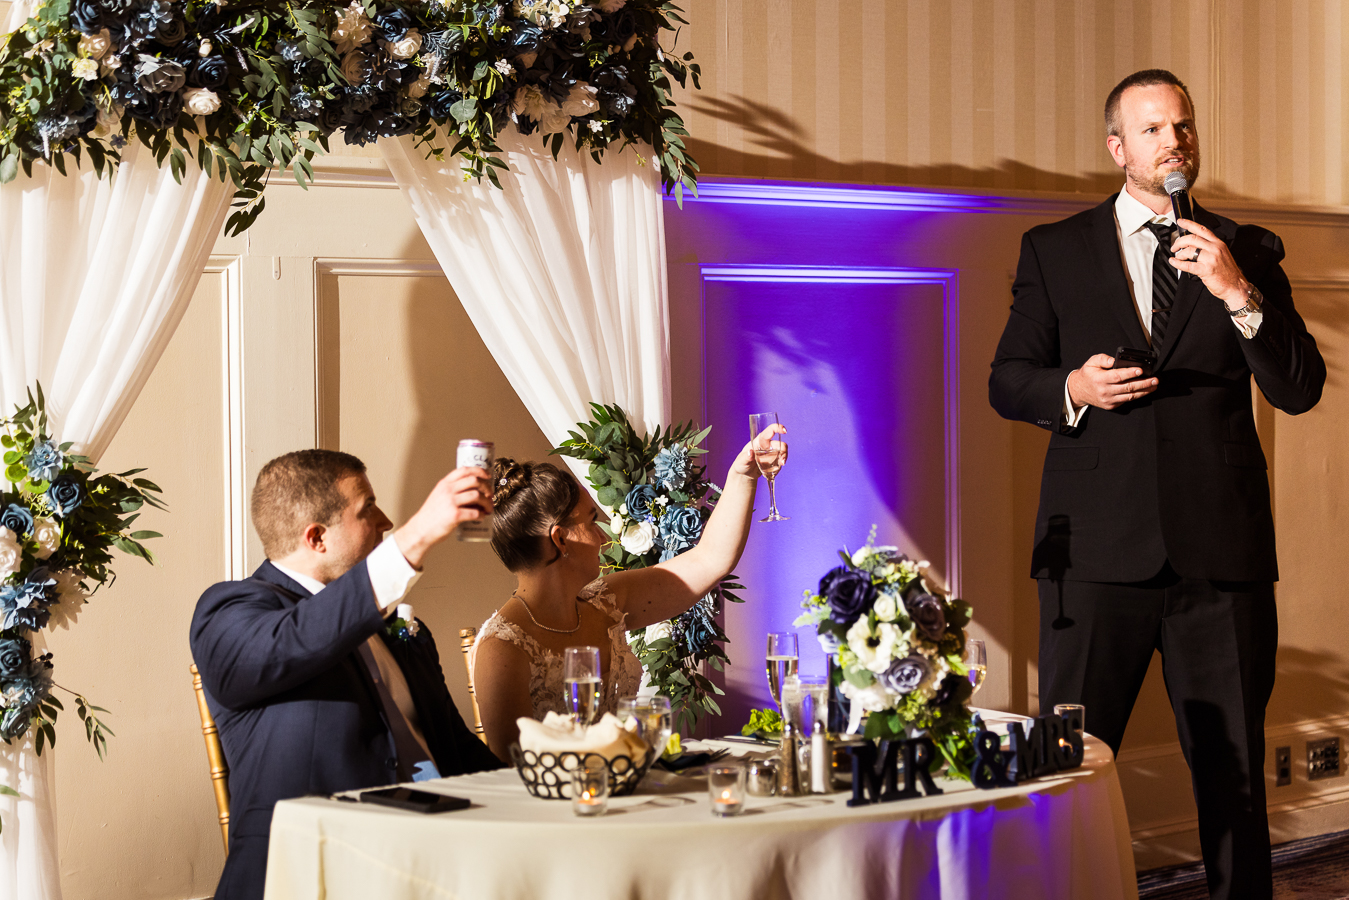 image of the bride and groom as they share a toast while one of the groomsmen shares their speech during the wedding traditions portion of this Gettysburg hotel wedding reception 